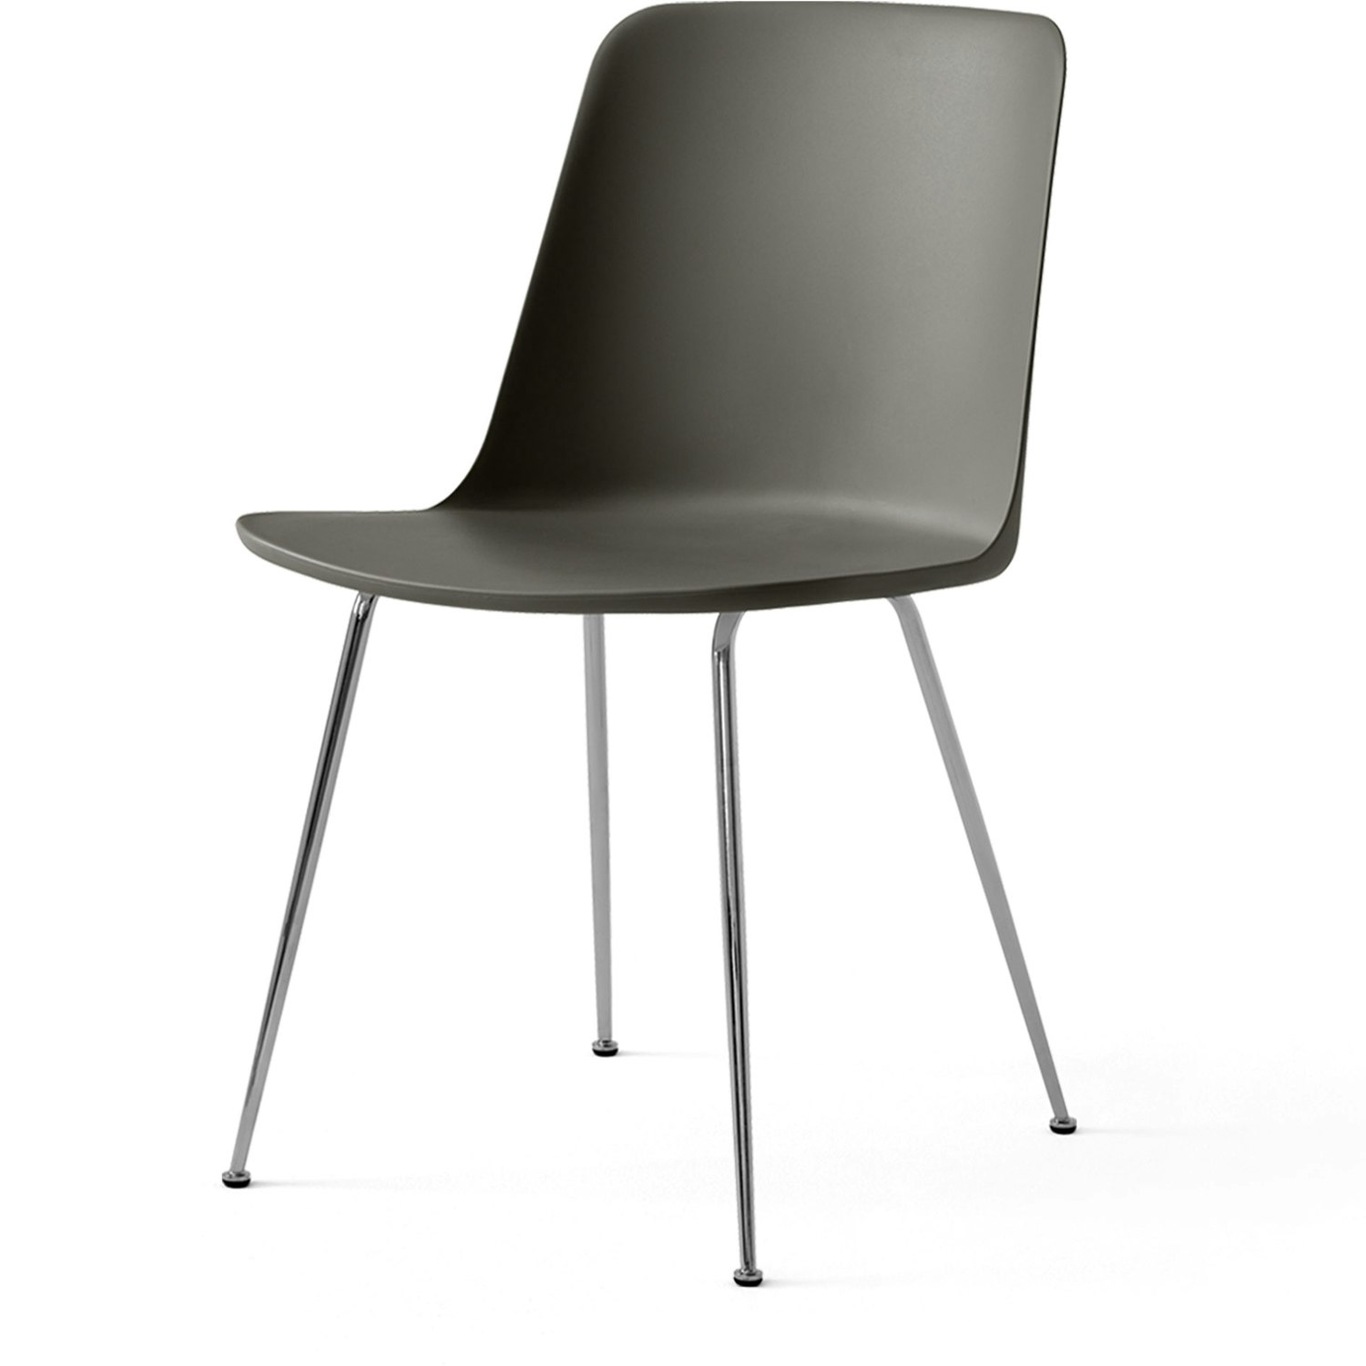 Rely Chair HW6, Chrome / Stone Grey